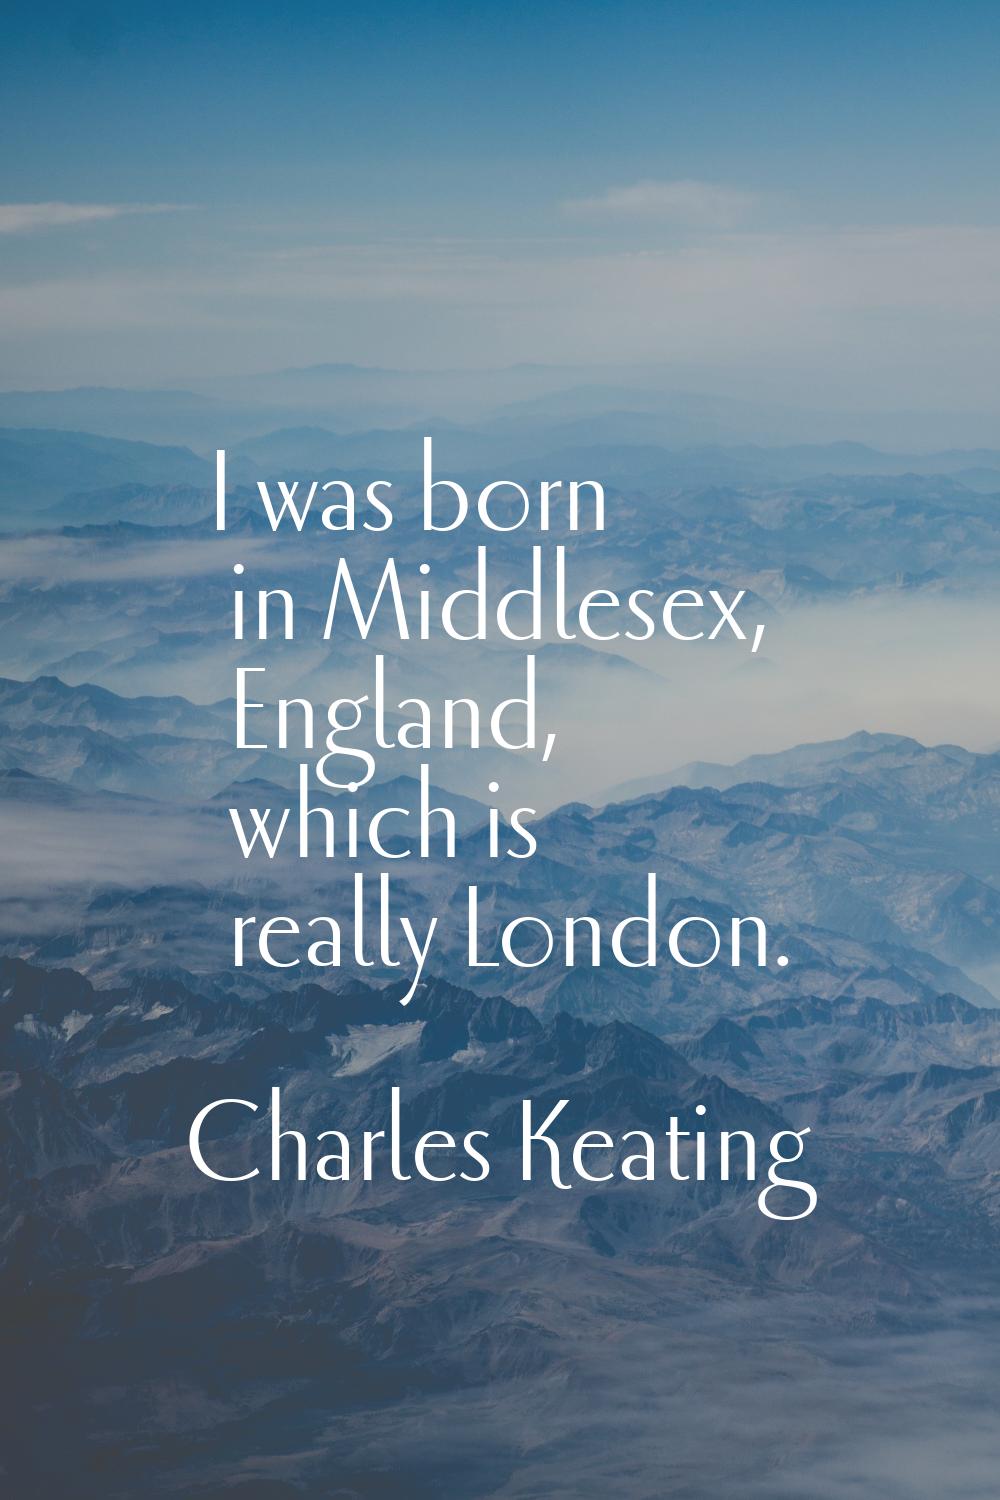 I was born in Middlesex, England, which is really London.